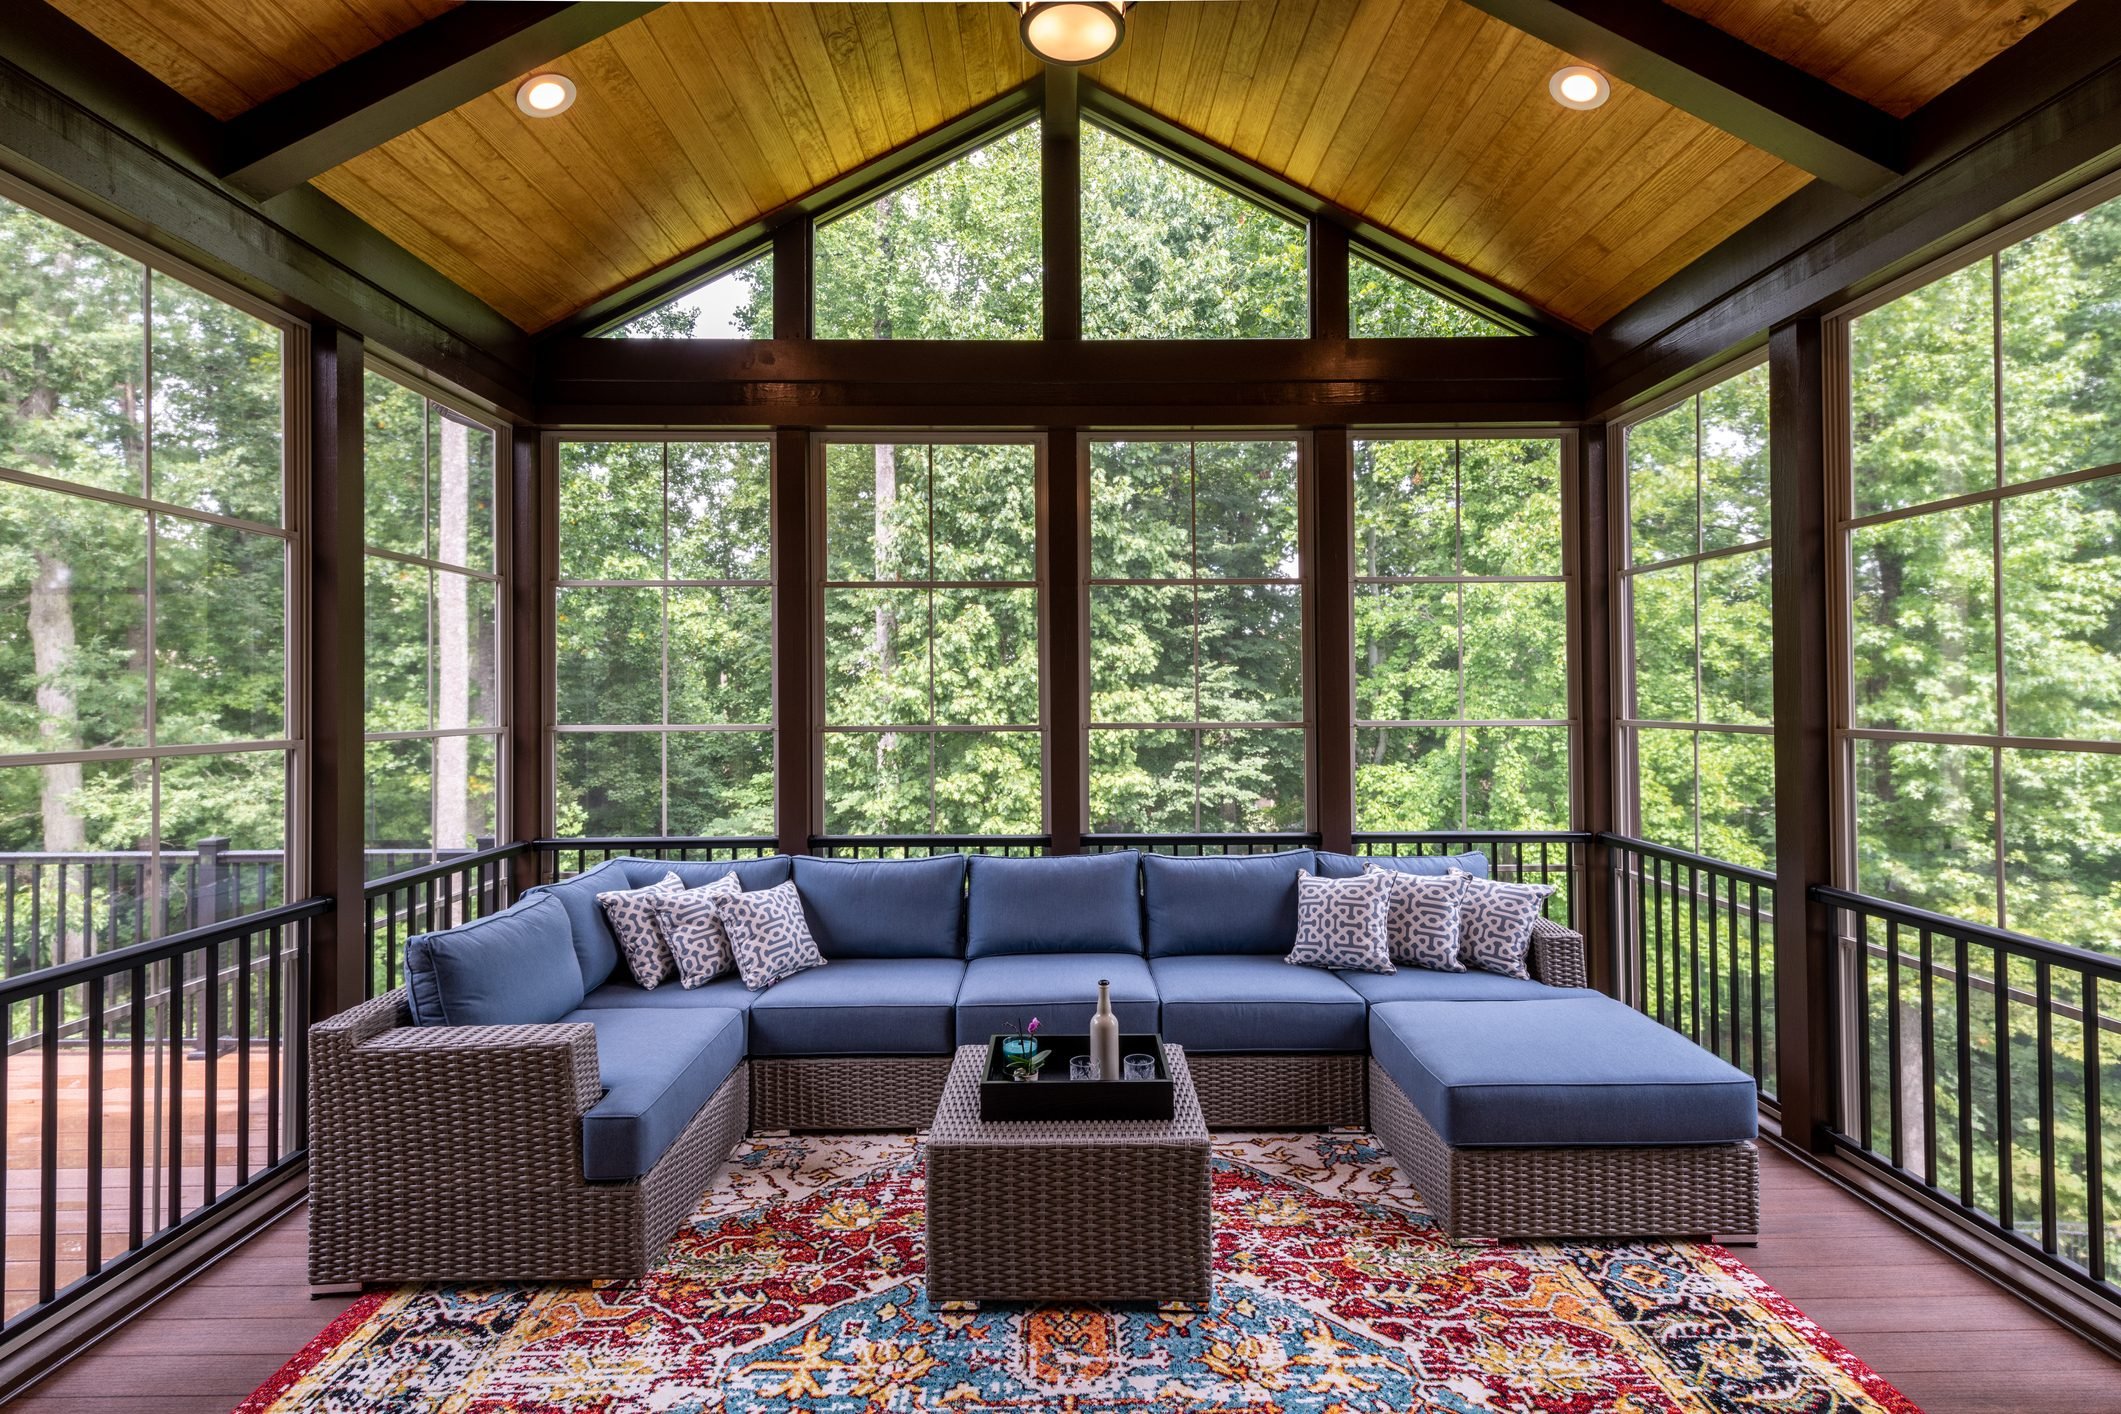 Sunroom vs. Screened Porch: Which Is Right for You?